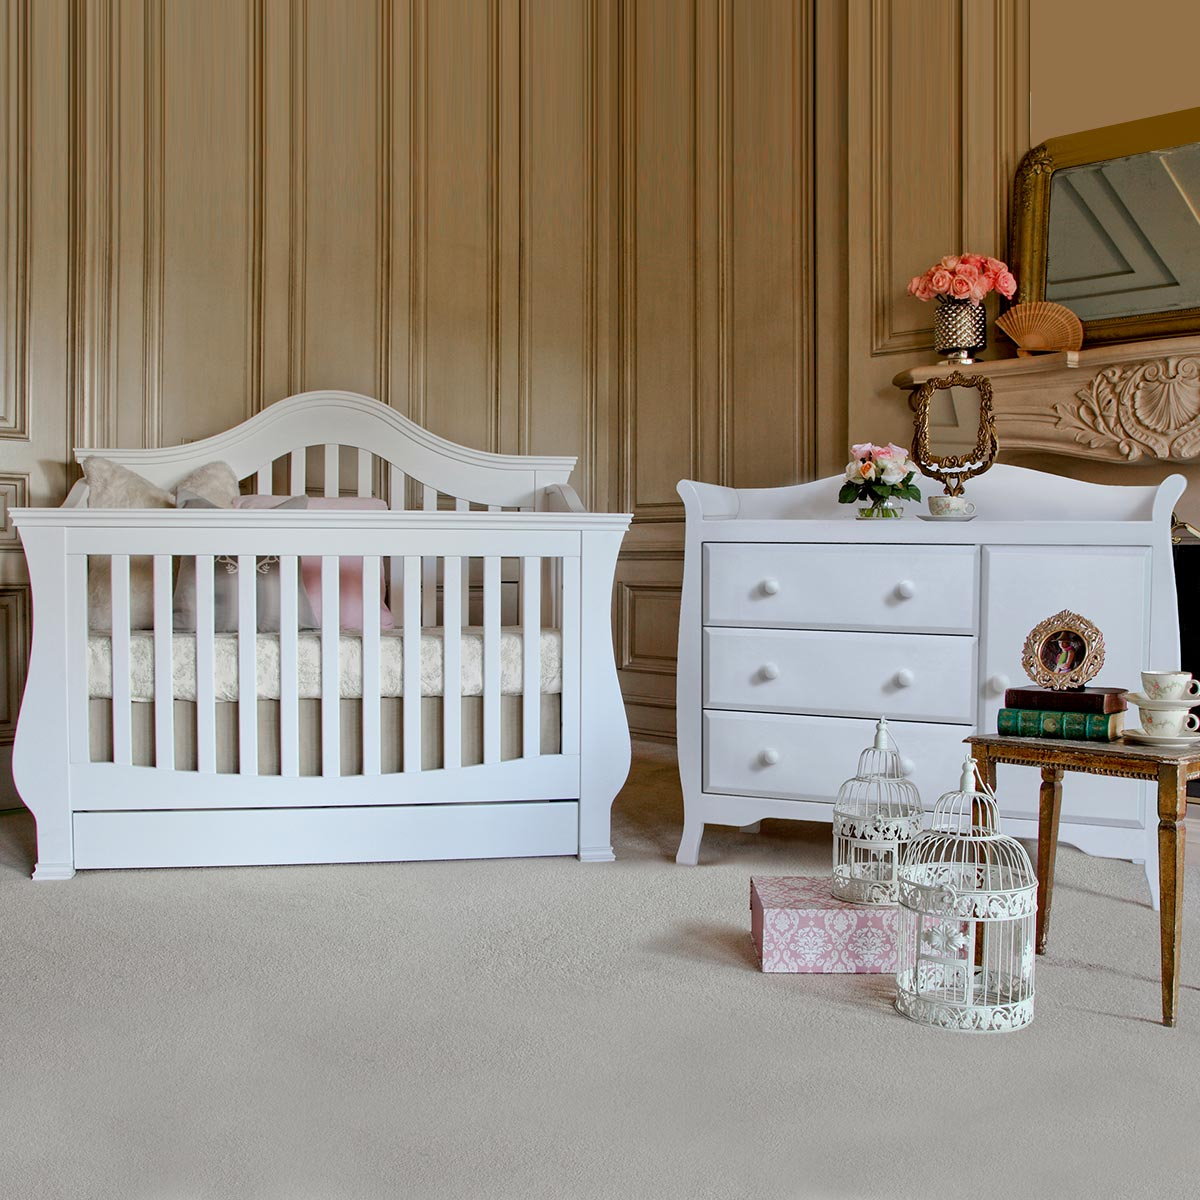 Million Dollar Ba 2 Piece Nursery Set Ashbury 4 In 1 Sleigh Convertible Crib And Combo Dresser In White within sizing 1200 X 1200